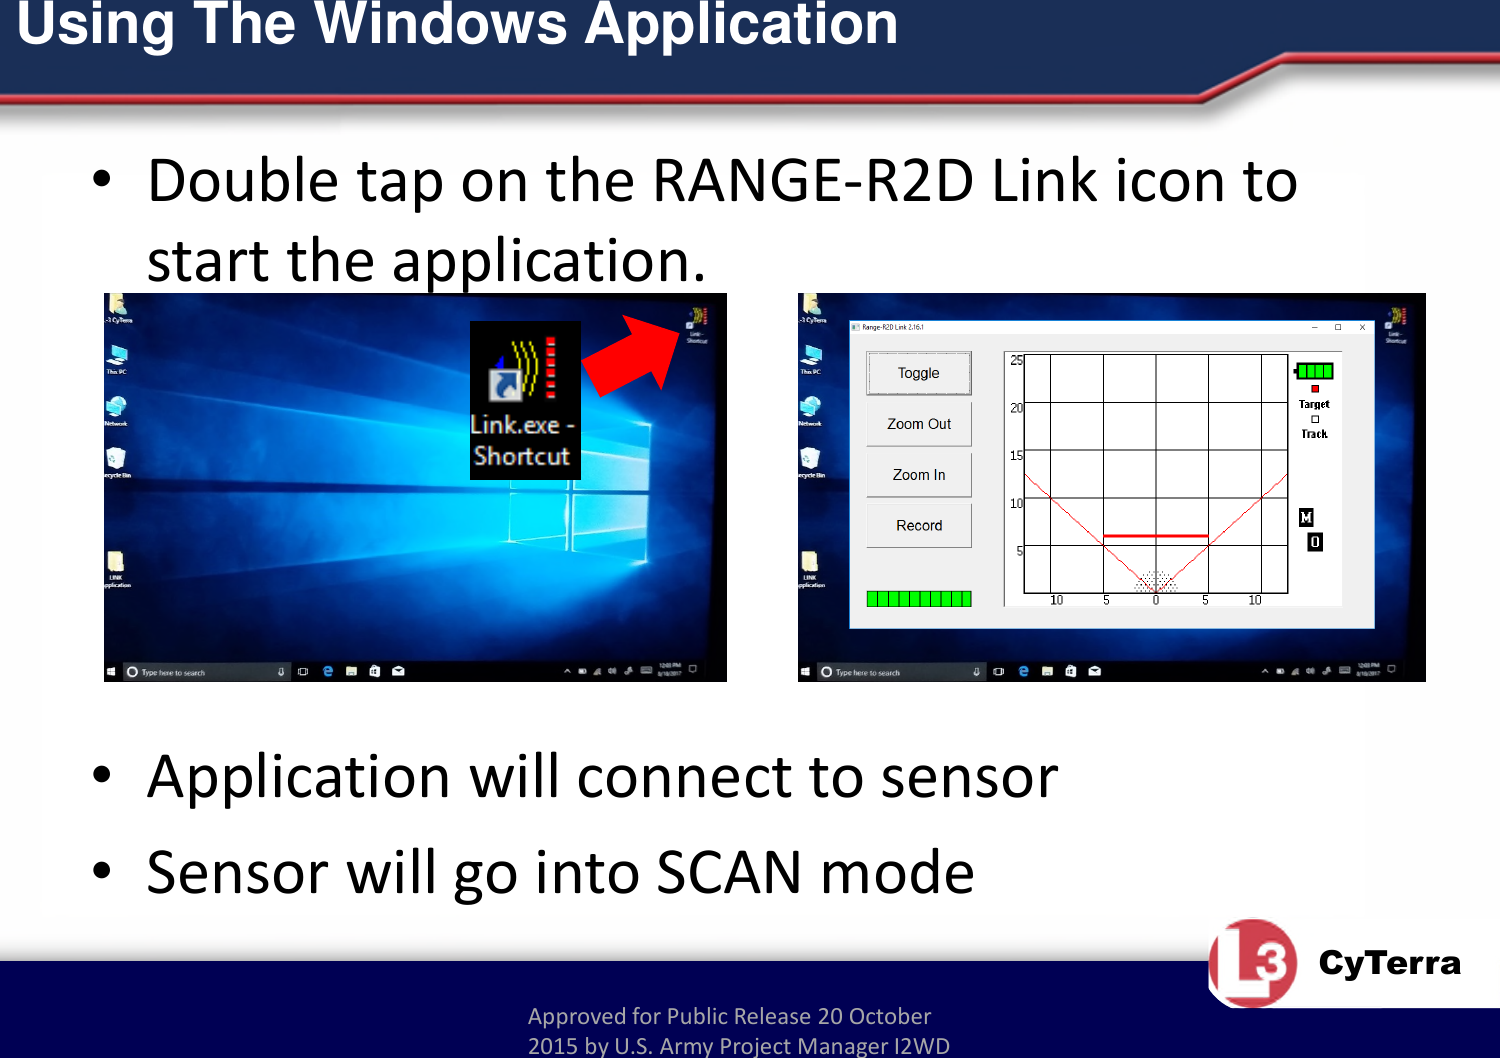 Approved for Public Release 20 October 2015 by U.S. Army Project Manager I2WDCyTerraUsing The Windows Application•Double tap on the RANGE-R2D Link icon to start the application.•Application will connect to sensor•Sensor will go into SCAN mode